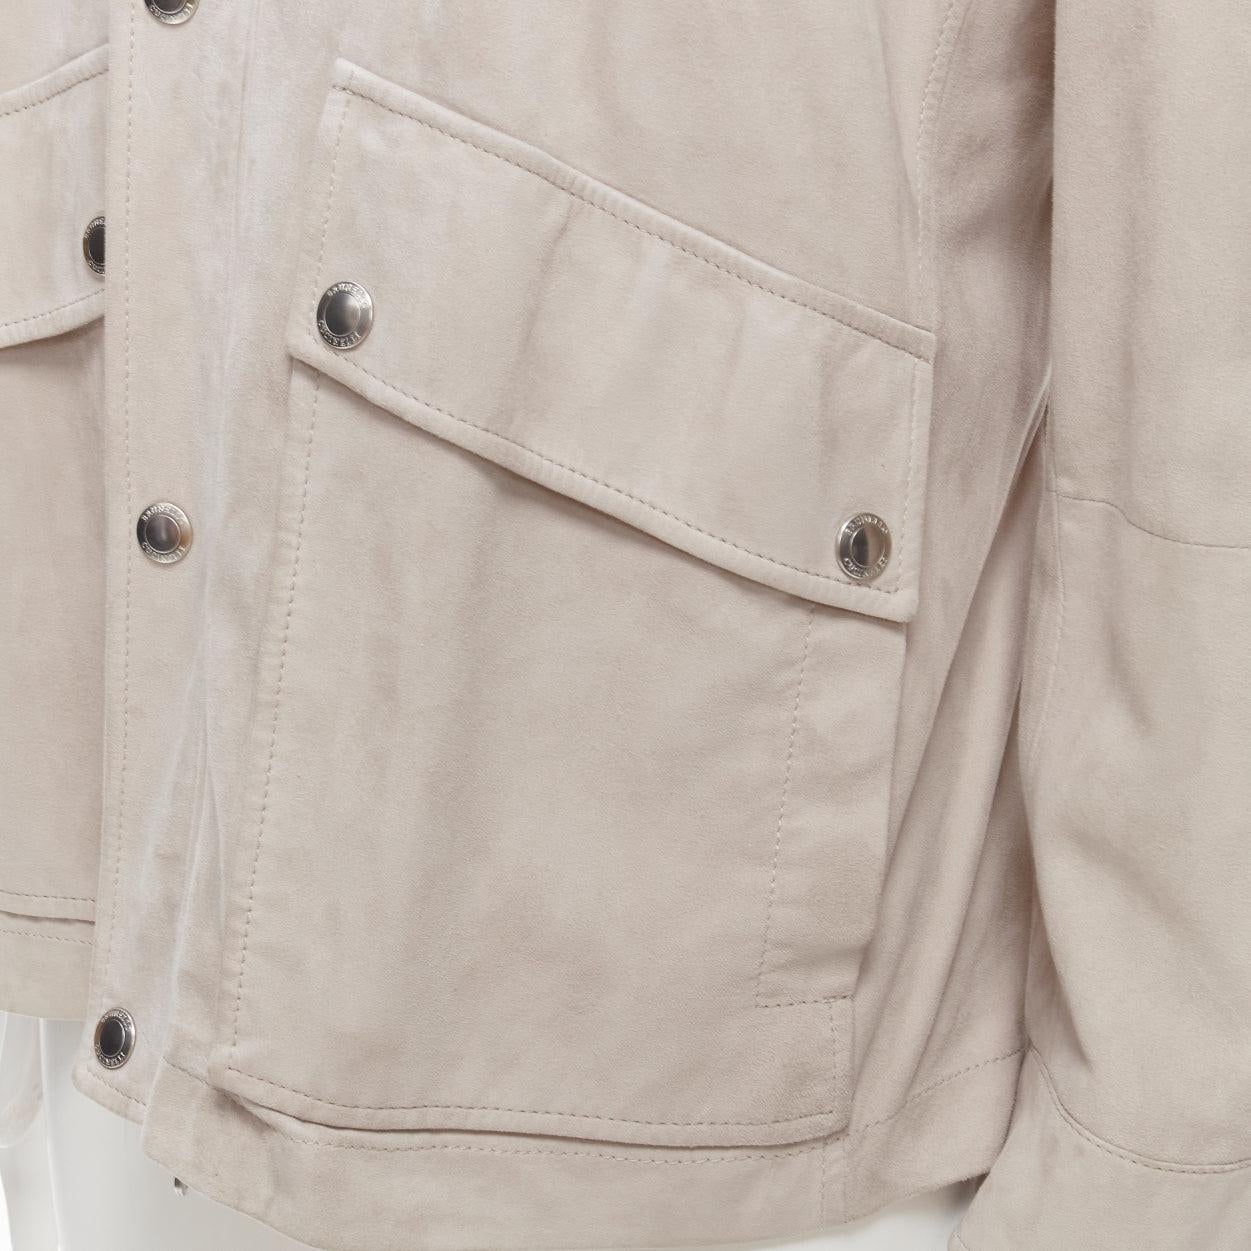 BRUNELLO CUCINELLI light grey genuine soft suede leather flap pocket jacket M
Reference: JSLE/A00016
Brand: Brunello Cucinelli
Material: Suede
Color: Grey
Pattern: Solid
Closure: Zip
Lining: Grey Cupro
Extra Details: Zip and snap buttons closure.